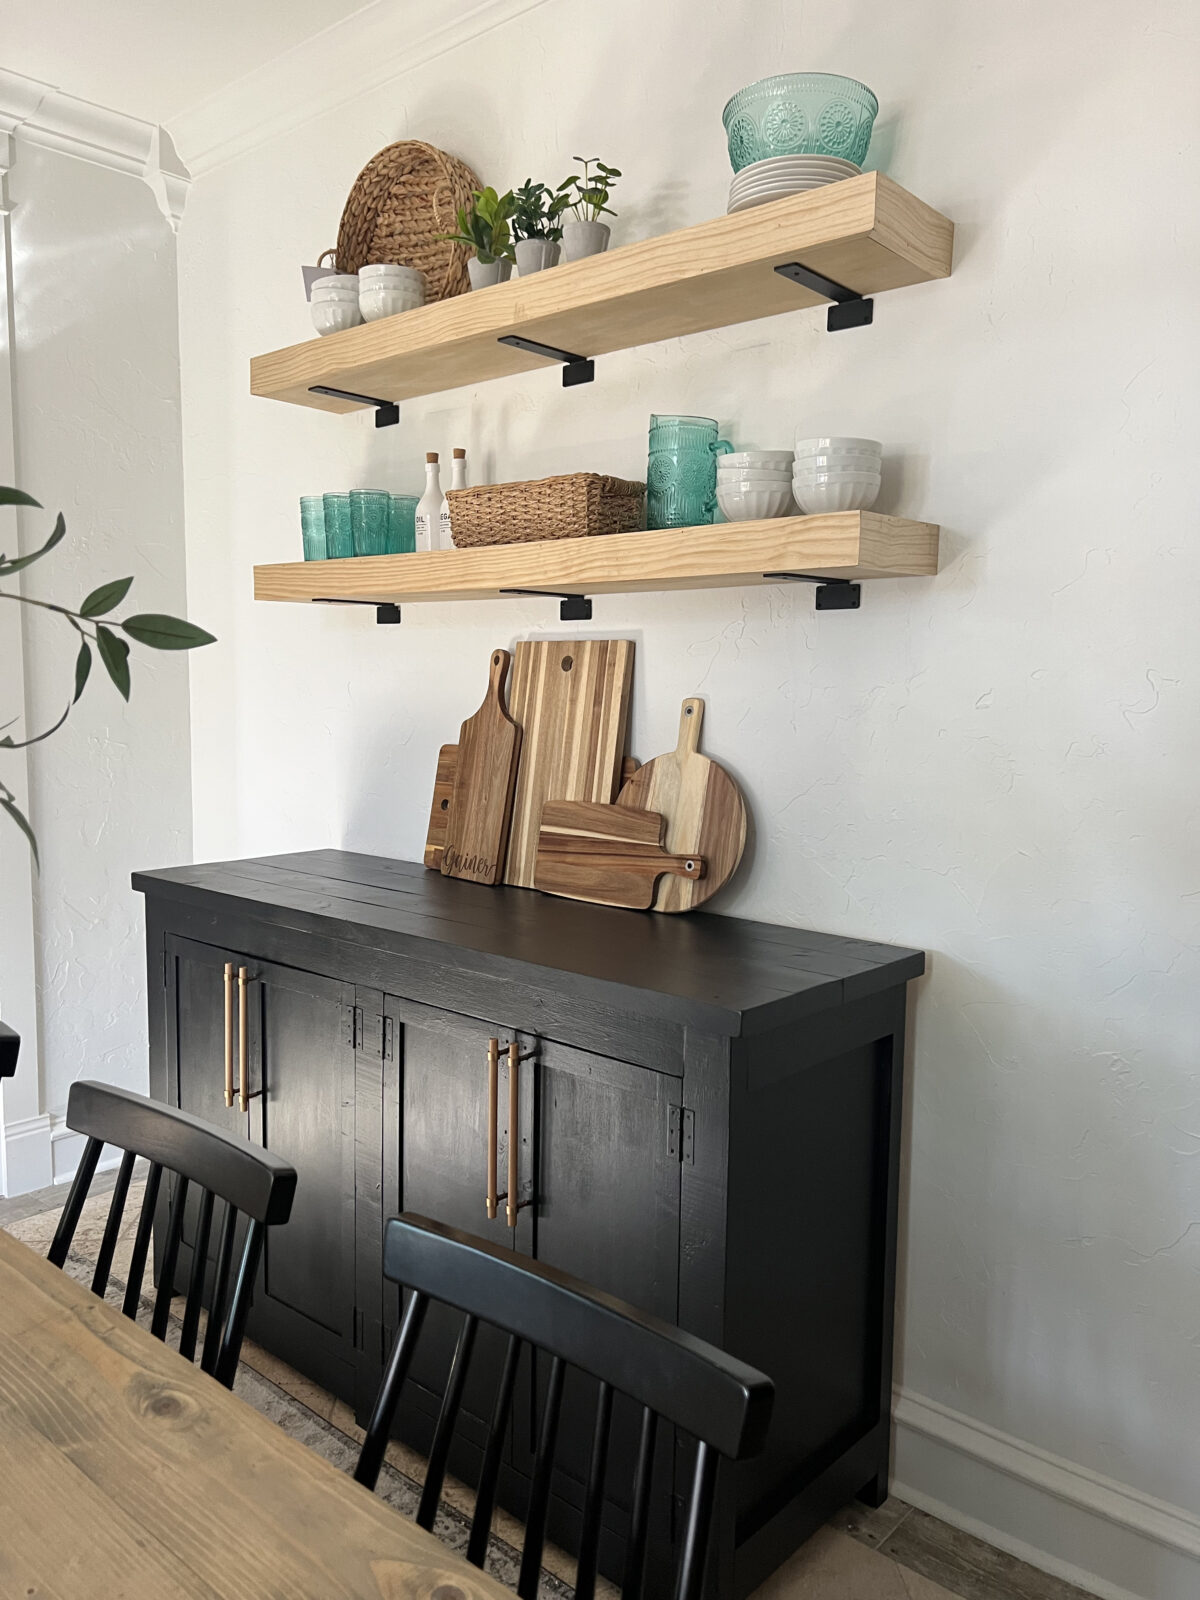 Knock-Down Shelving System, Woodworking Project